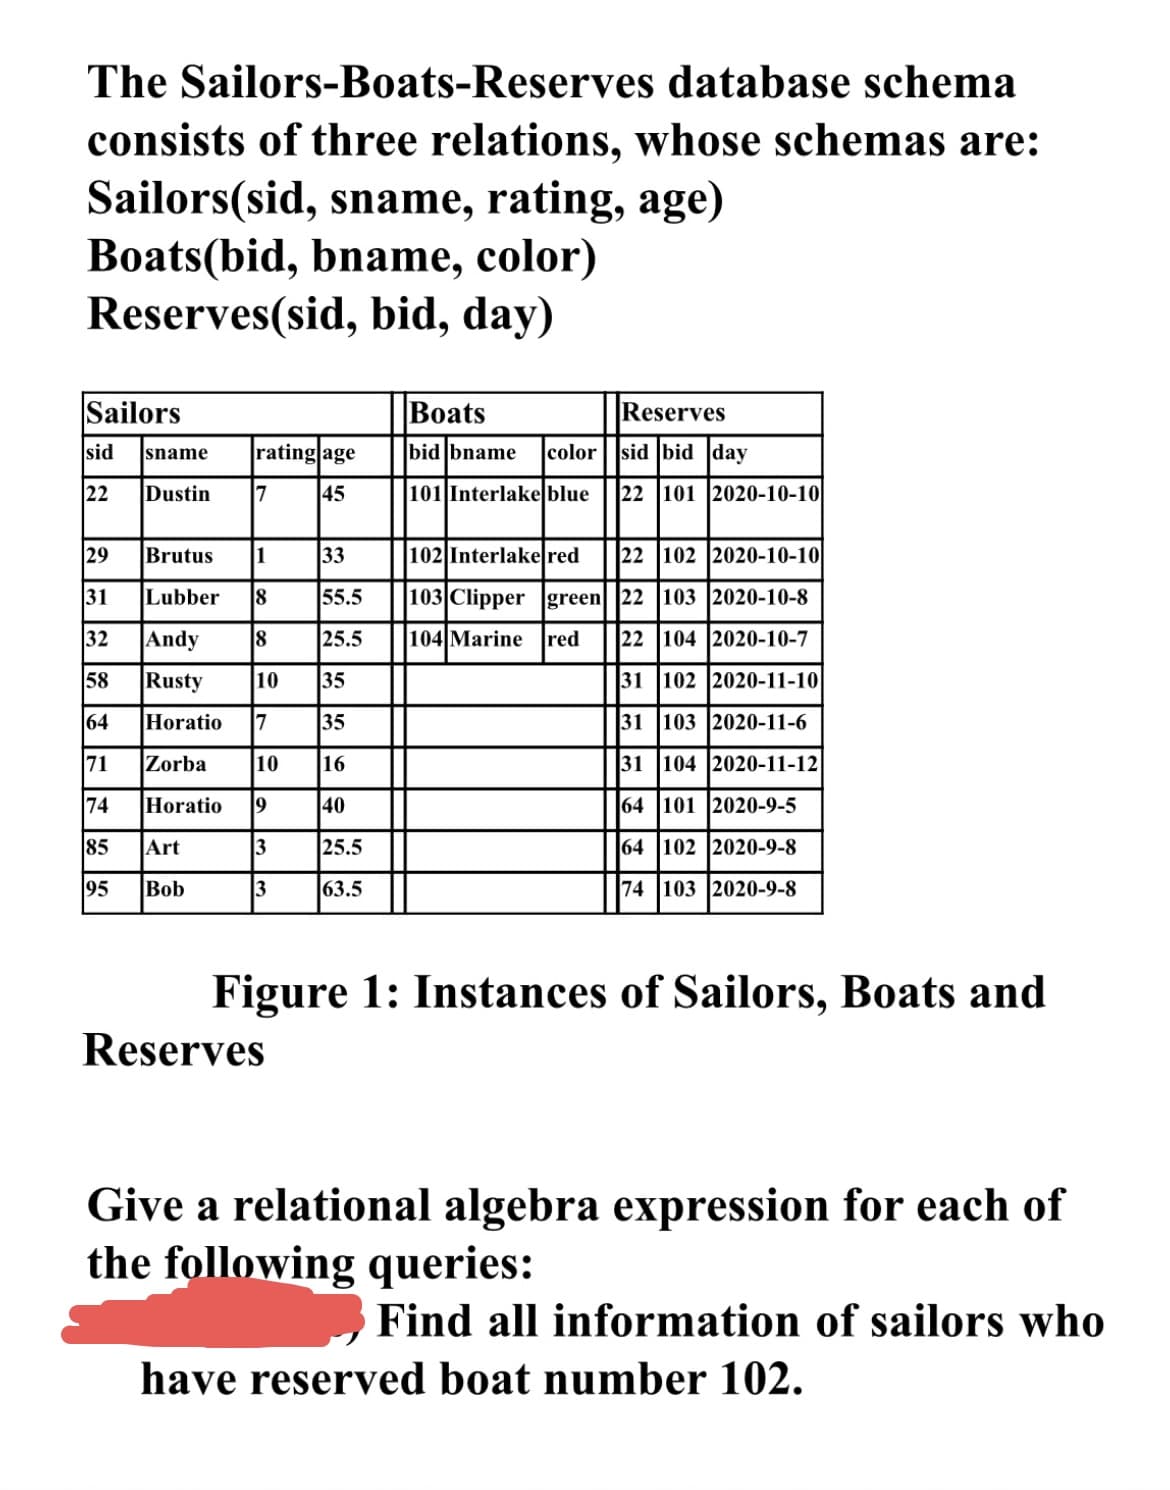 ### Sailors-Boats-Reserves Database Schema

The Sailors-Boats-Reserves database schema consists of three relations, whose schemas are:

- **Sailors(sid, sname, rating, age)**
- **Boats(bid, bname, color)**
- **Reserves(sid, bid, day)**

Below is a detailed description of the data instances present in this database.

#### Sailors Table

| sid | sname   | rating | age  |
|-----|---------|--------|------|
| 22  | Dustin  | 7      | 45   |
| 29  | Brutus  | 1      | 33   |
| 31  | Lubber  | 8      | 55.5 |
| 32  | Andy    | 8      | 25.5 |
| 58  | Rusty   | 10     | 35   |
| 64  | Horatio | 7      | 35   |
| 71  | Zorba   | 10     | 16   |
| 74  | Horatio | 9      | 40   |
| 85  | Art     | 3      | 25.5 |
| 95  | Bob     | 3      | 63.5 |

#### Boats Table

| bid | bname      | color  |
|-----|------------|--------|
| 101 | Interlake  | blue   |
| 102 | Interlake  | red    |
| 103 | Clipper    | green  |
| 104 | Marine     | red    |

#### Reserves Table

| sid | bid | day        |
|-----|-----|------------|
| 22  | 101 | 2020-10-10 |
| 22  | 102 | 2020-10-10 |
| 22  | 103 | 2020-10-8  |
| 22  | 104 | 2020-10-7  |
| 31  | 102 | 2020-11-10 |
| 31  | 103 | 2020-11-6  |
| 31  | 104 | 2020-11-12 |
| 64  | 101 | 2020-9-5   |
| 64 